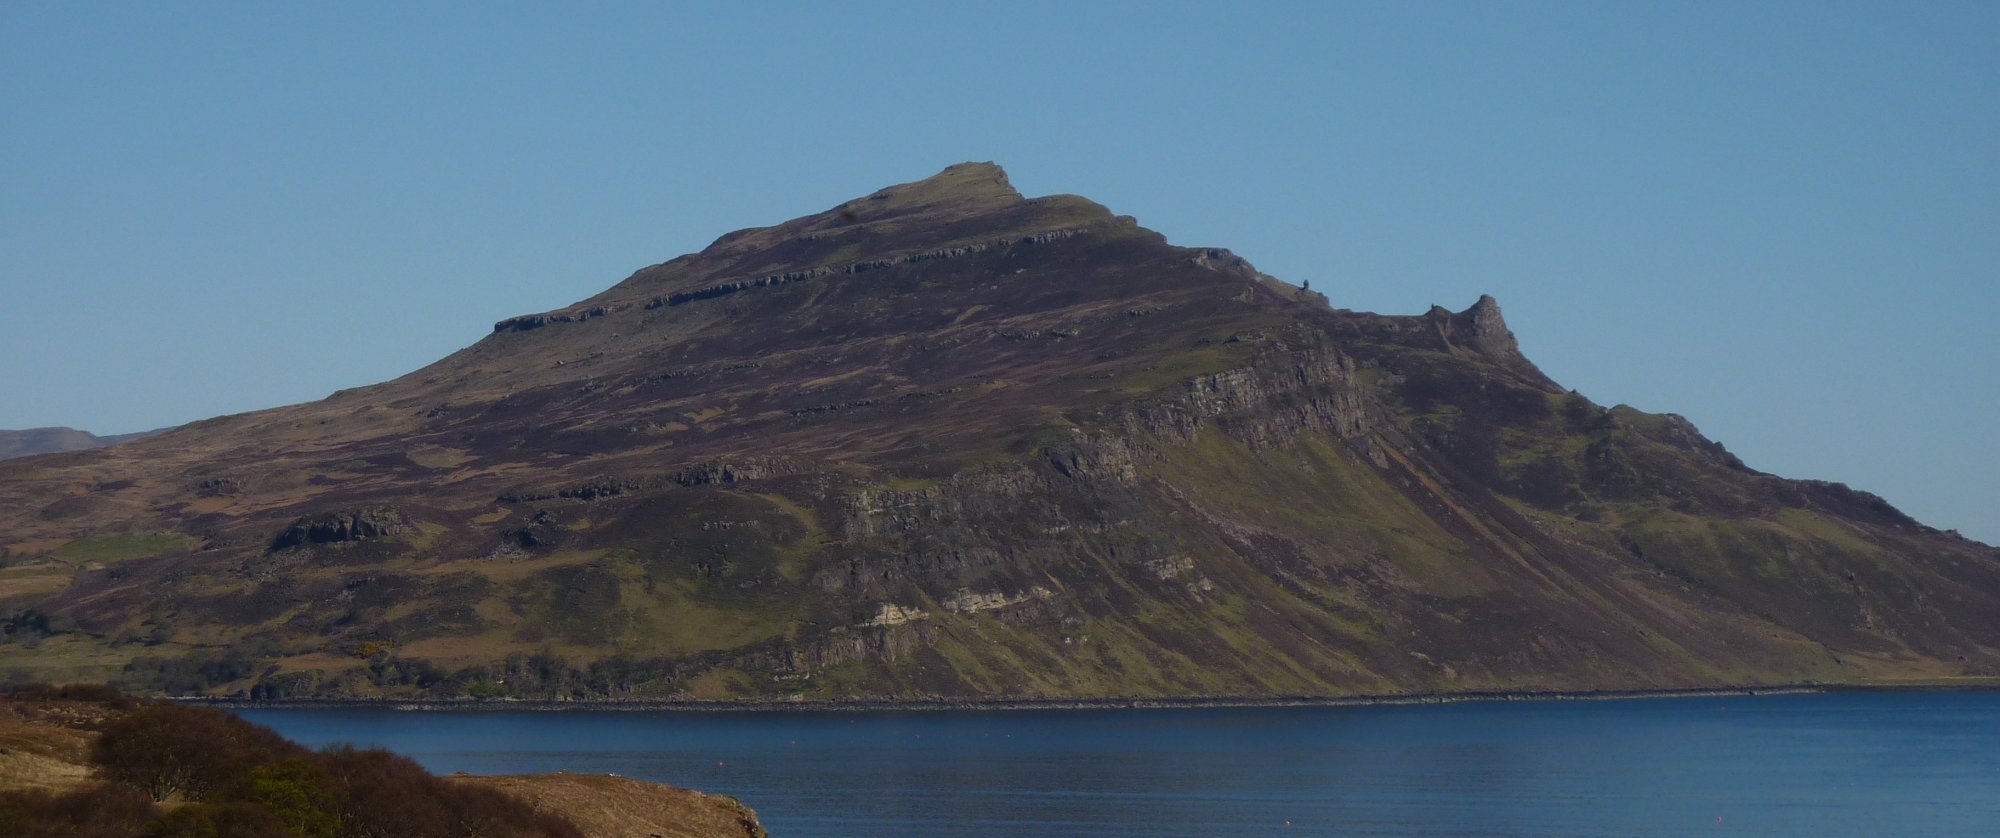 Looking across Tianavaig Bay to Ben Tianavaig from the Braes road